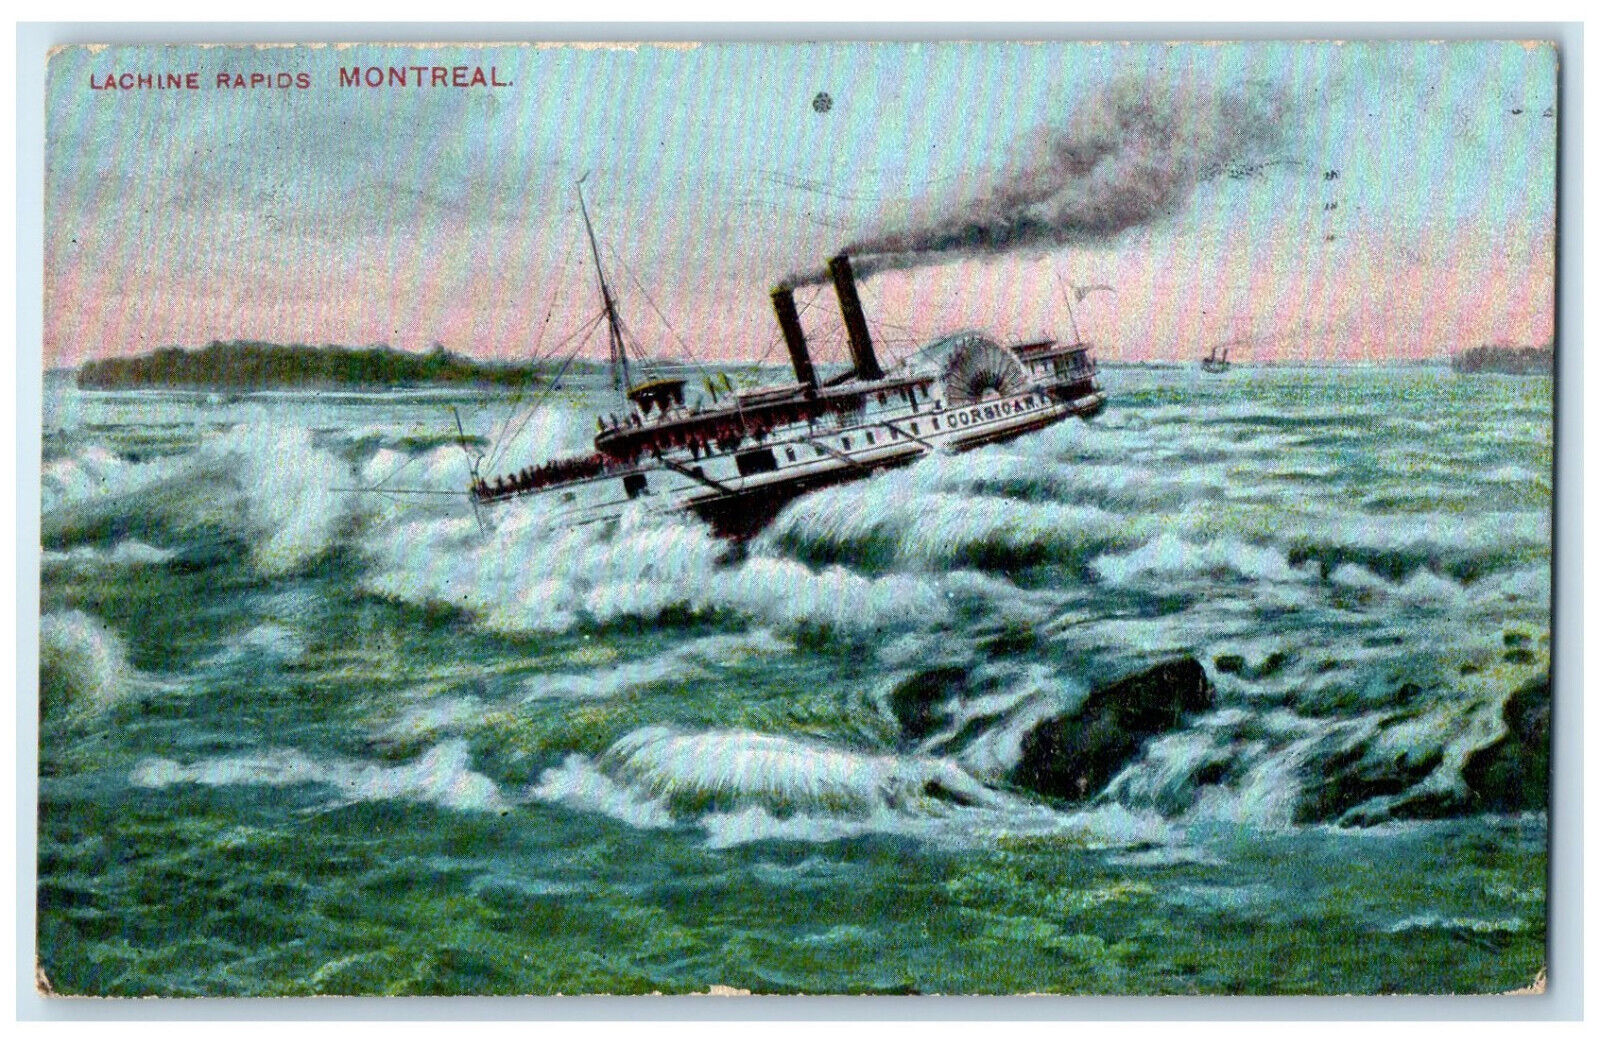 1908 Steamboat Battling Waves Lachine Rapids Montreal Quebec Canada Postcard